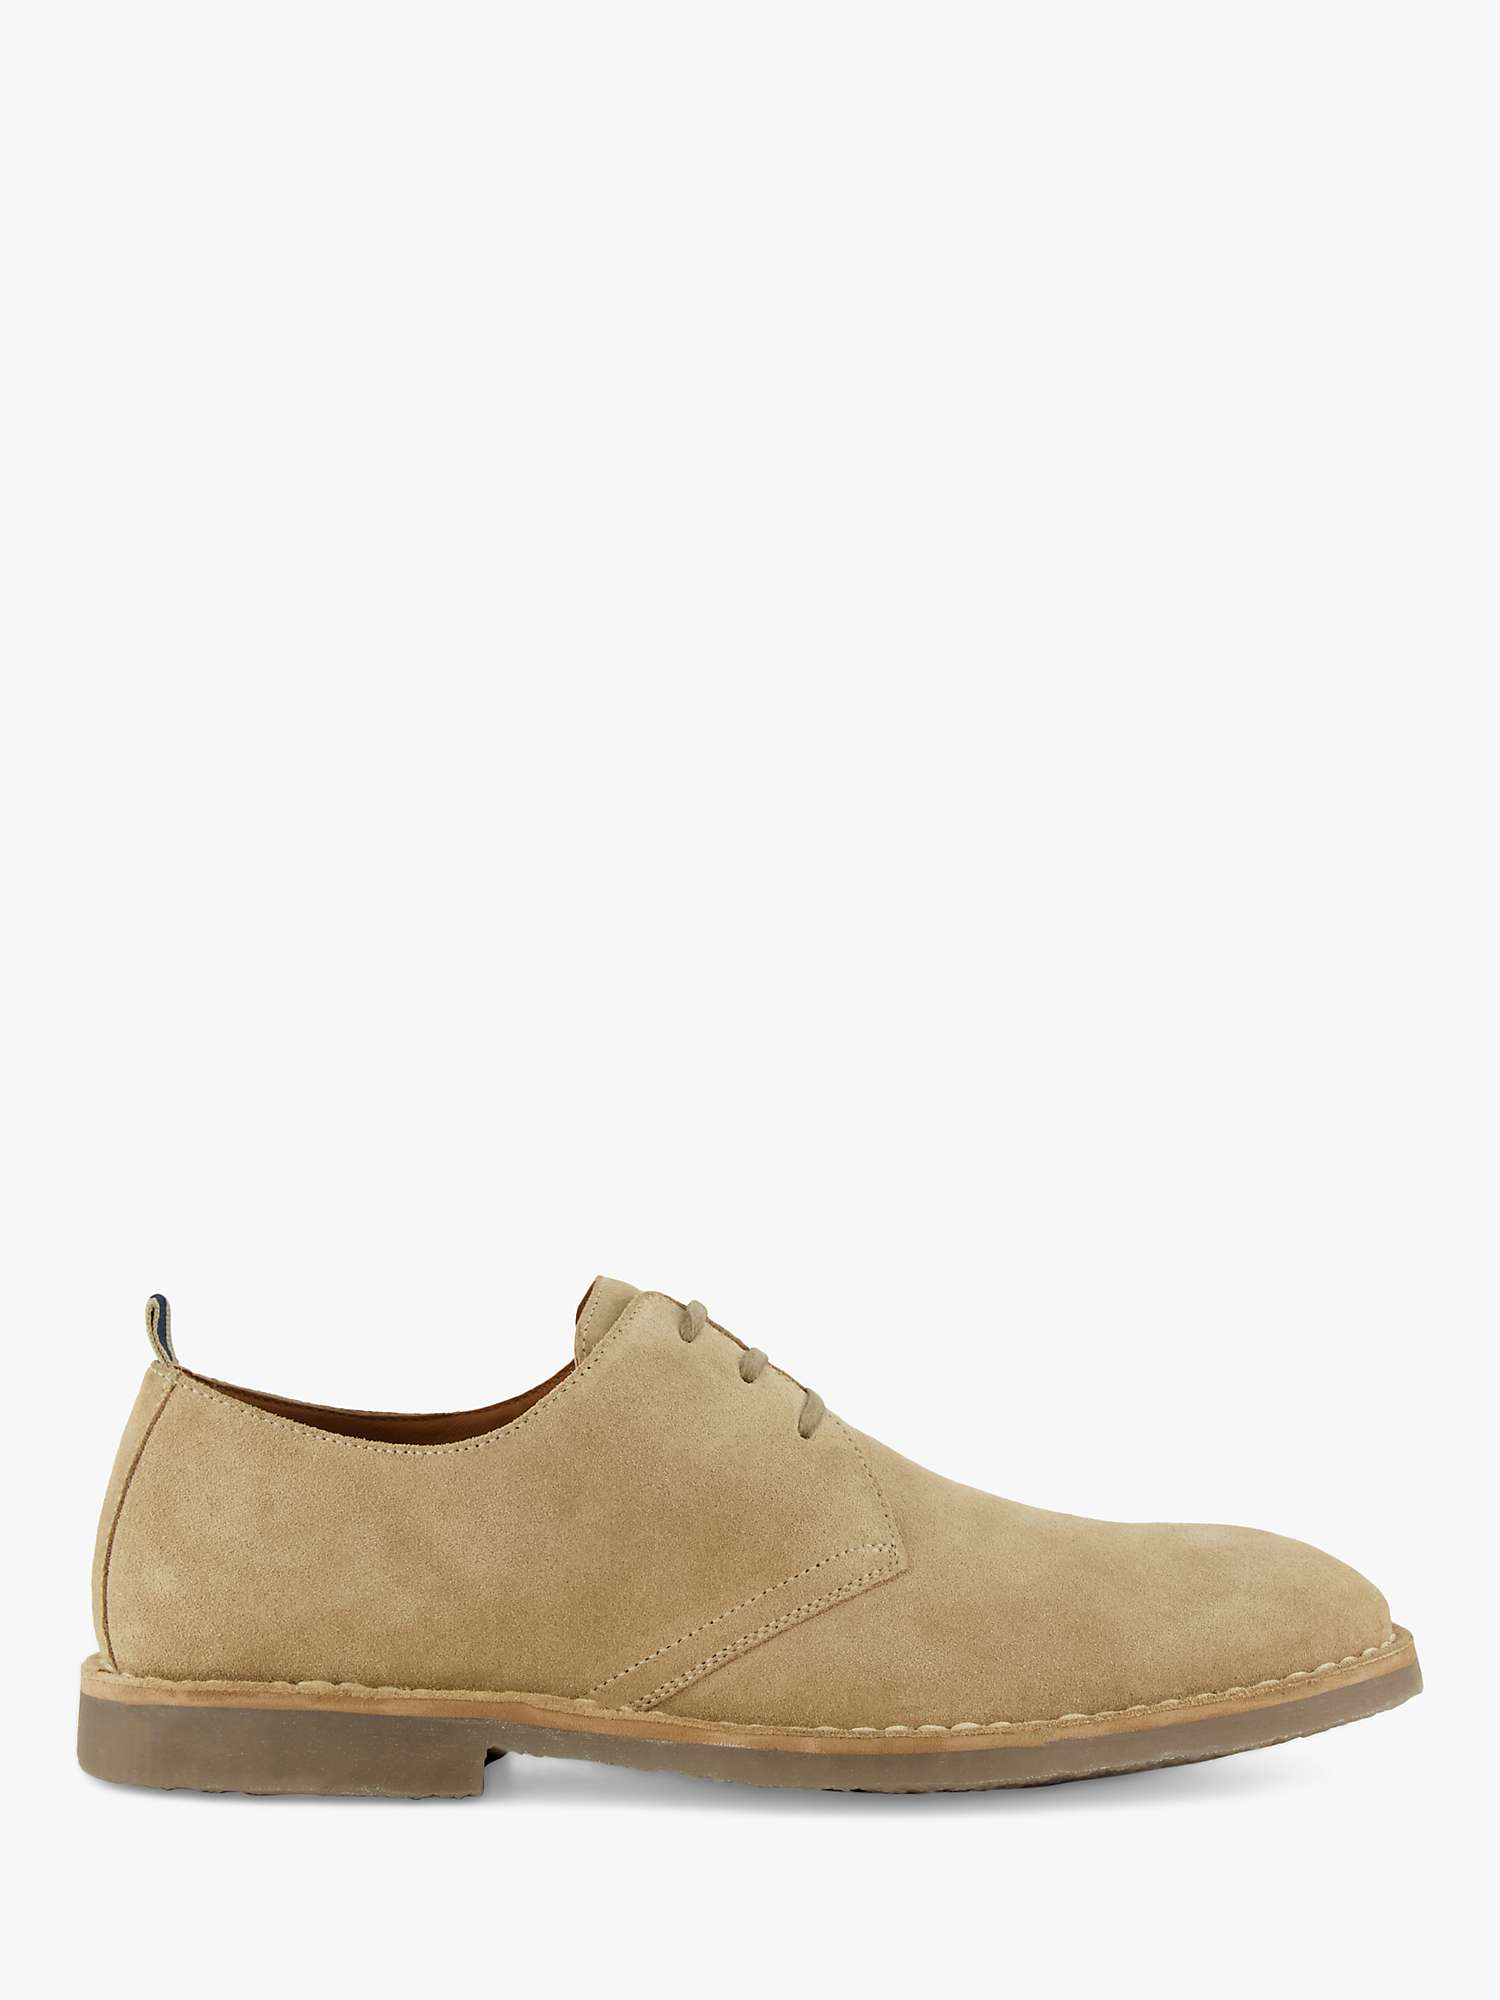 Buy Dune Brooked Suede Chukka Shoes, Stone Online at johnlewis.com